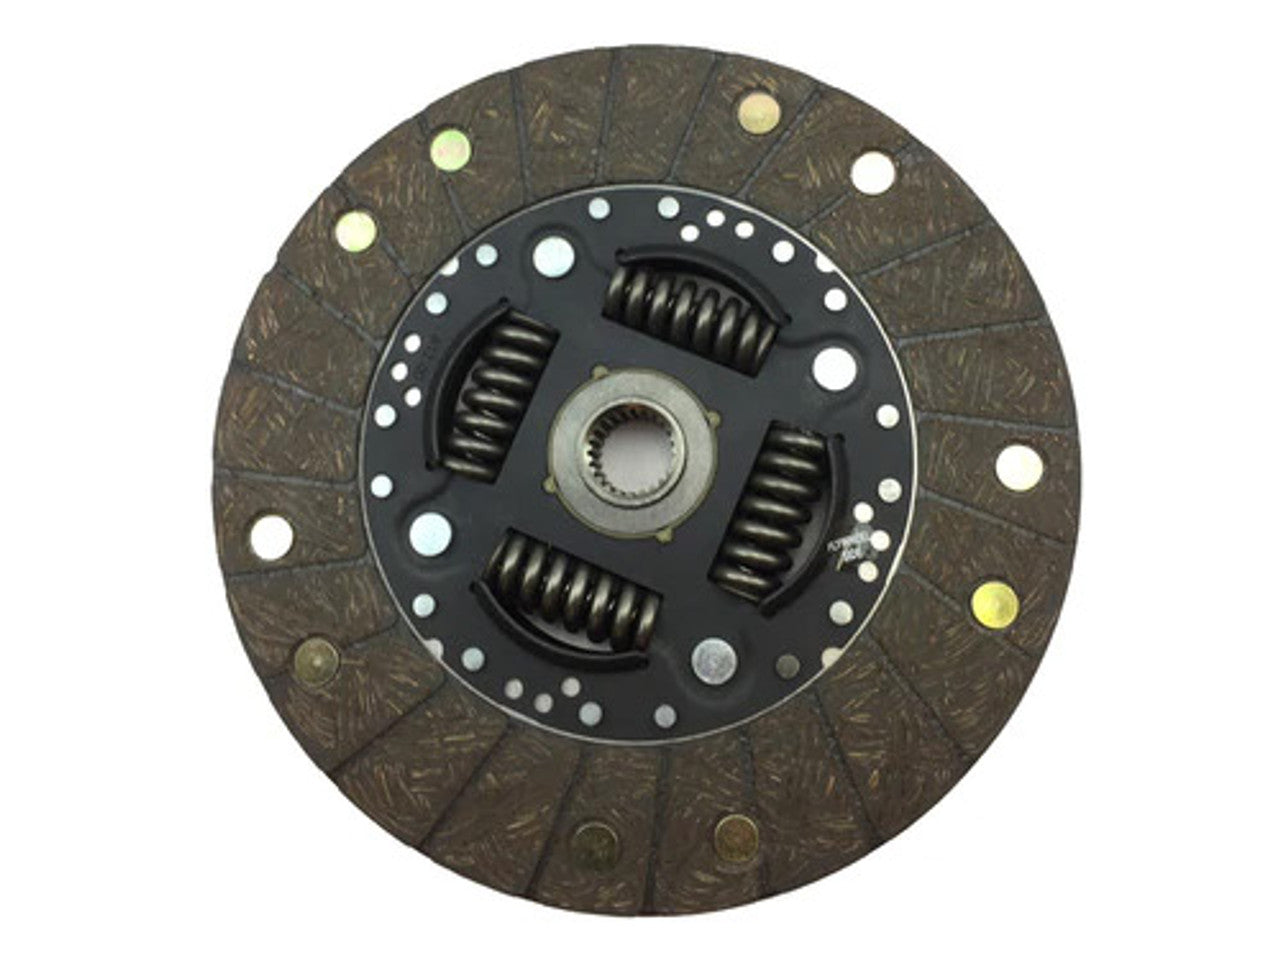 RTS Performance Clutch – Twin-Friction Clutch Kit for 2.0TFSI EA113